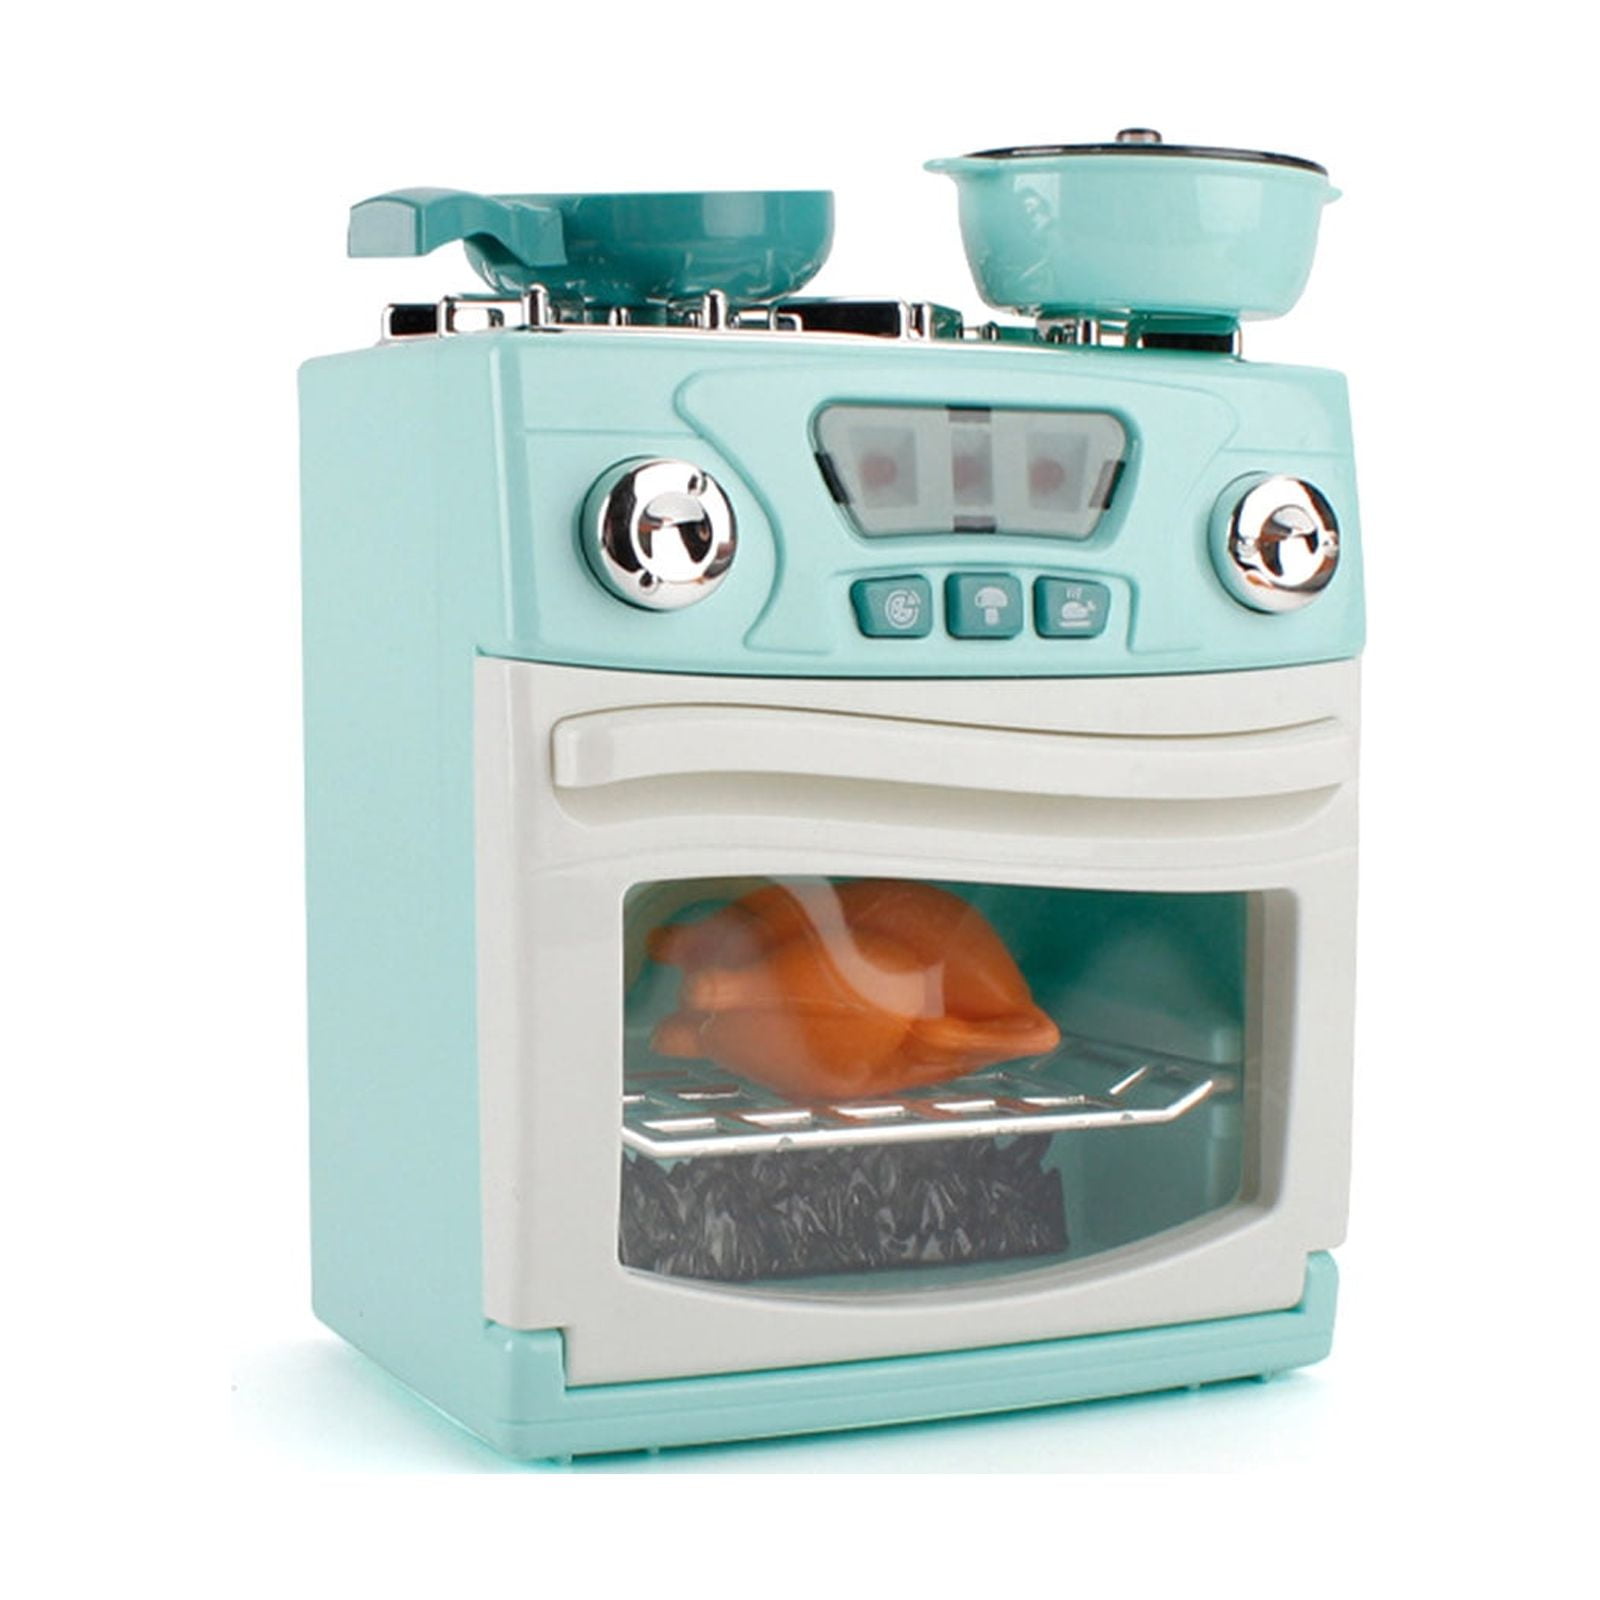 1Pc Children's Make-believe Toy Electric Oven Funny Kids Play House Toy